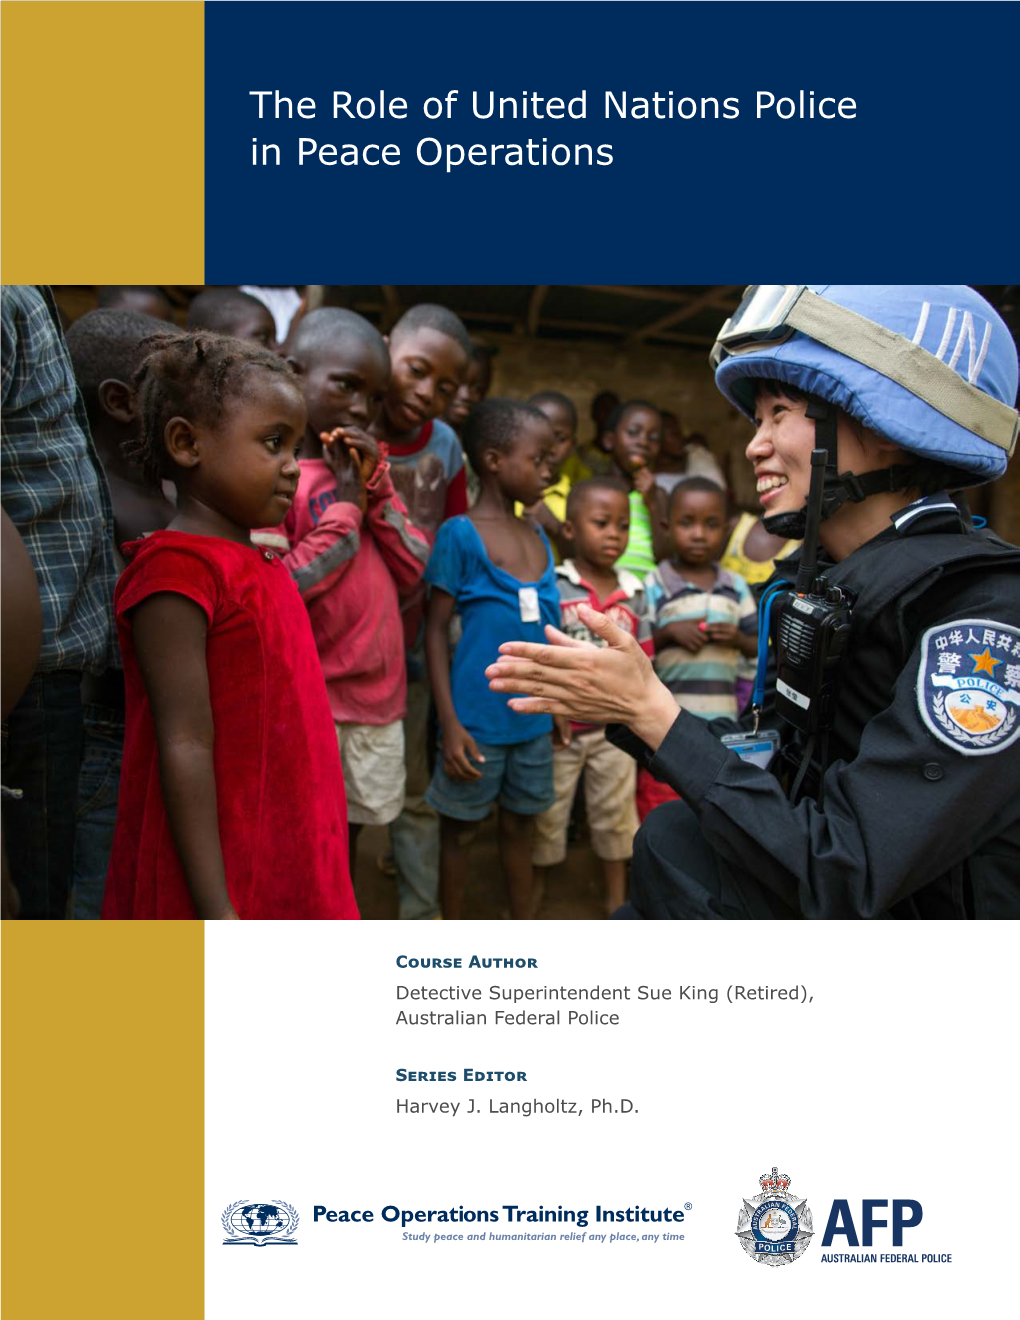 The Role of United Nations Police in Peace Operations